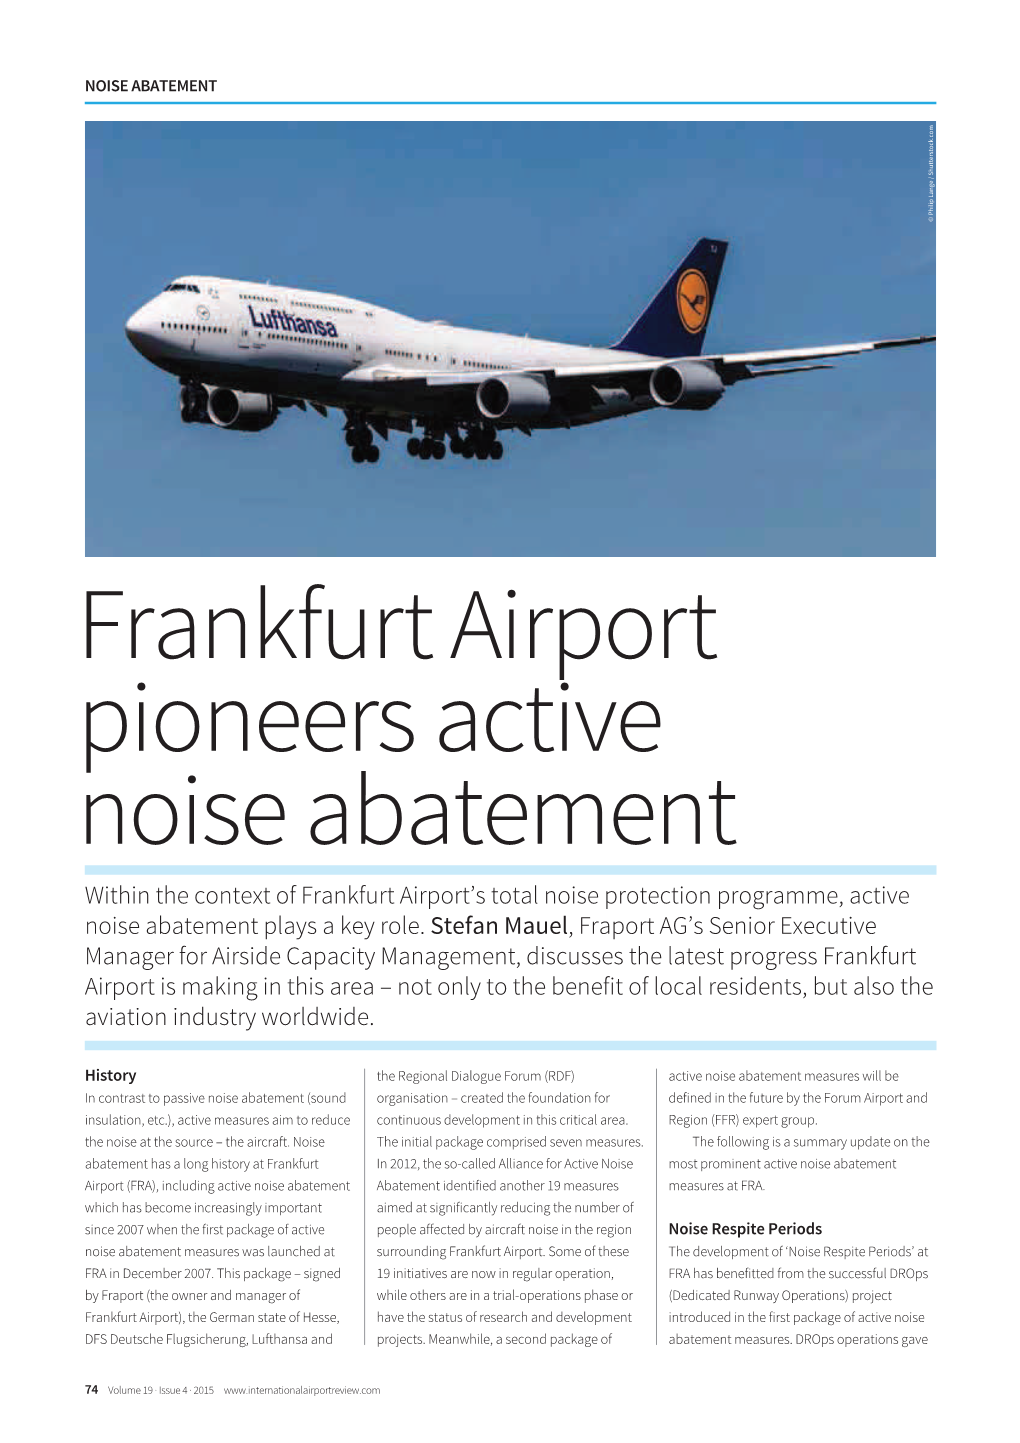 Frankfurt Airport Pioneers Active Noise Abatement Within the Context of Frankfurt Airport’S Total Noise Protection Programme, Active Noise Abatement Plays a Key Role